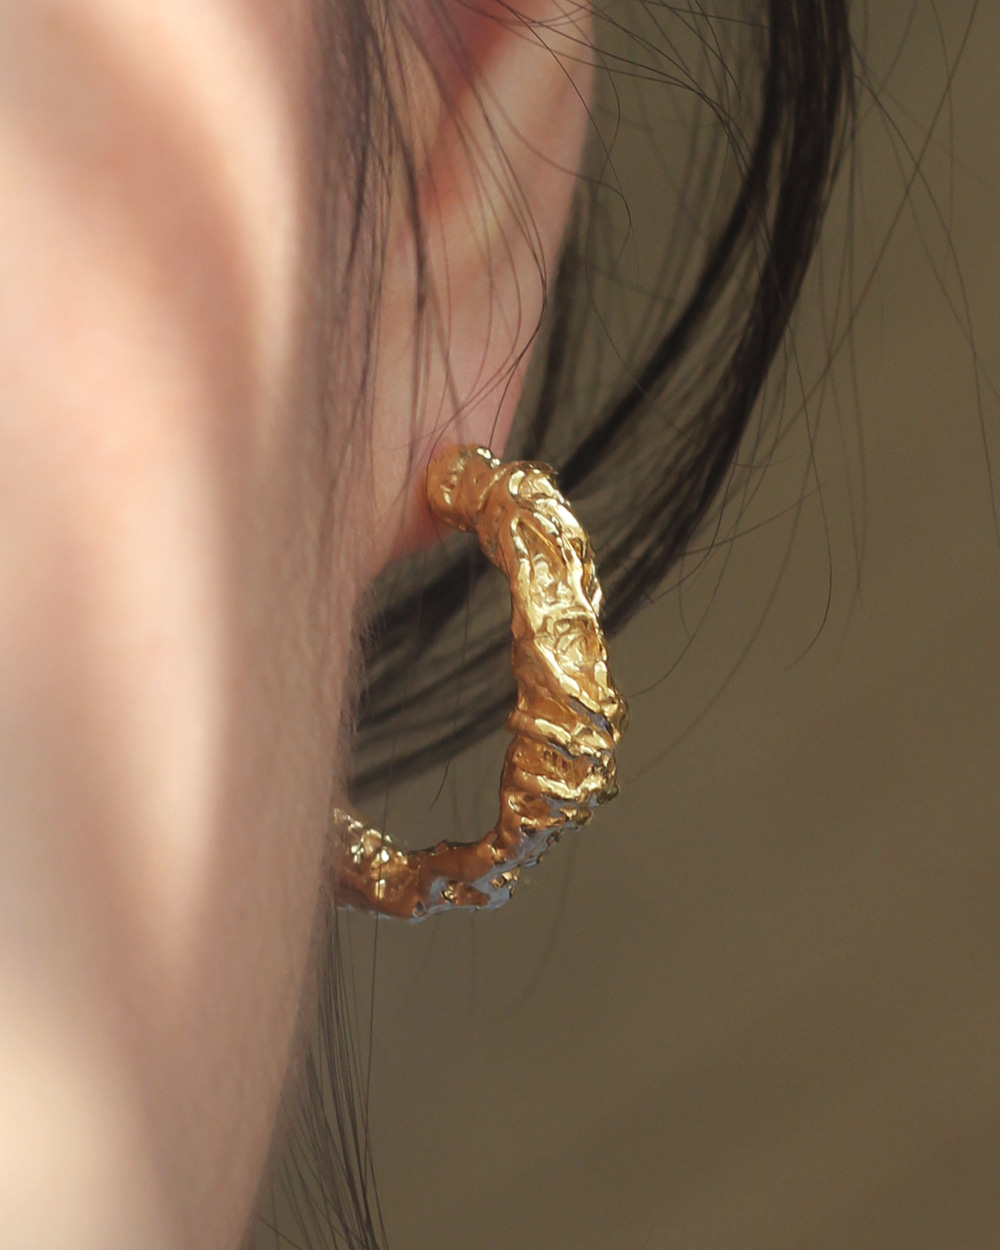 parched wreath earring (L)